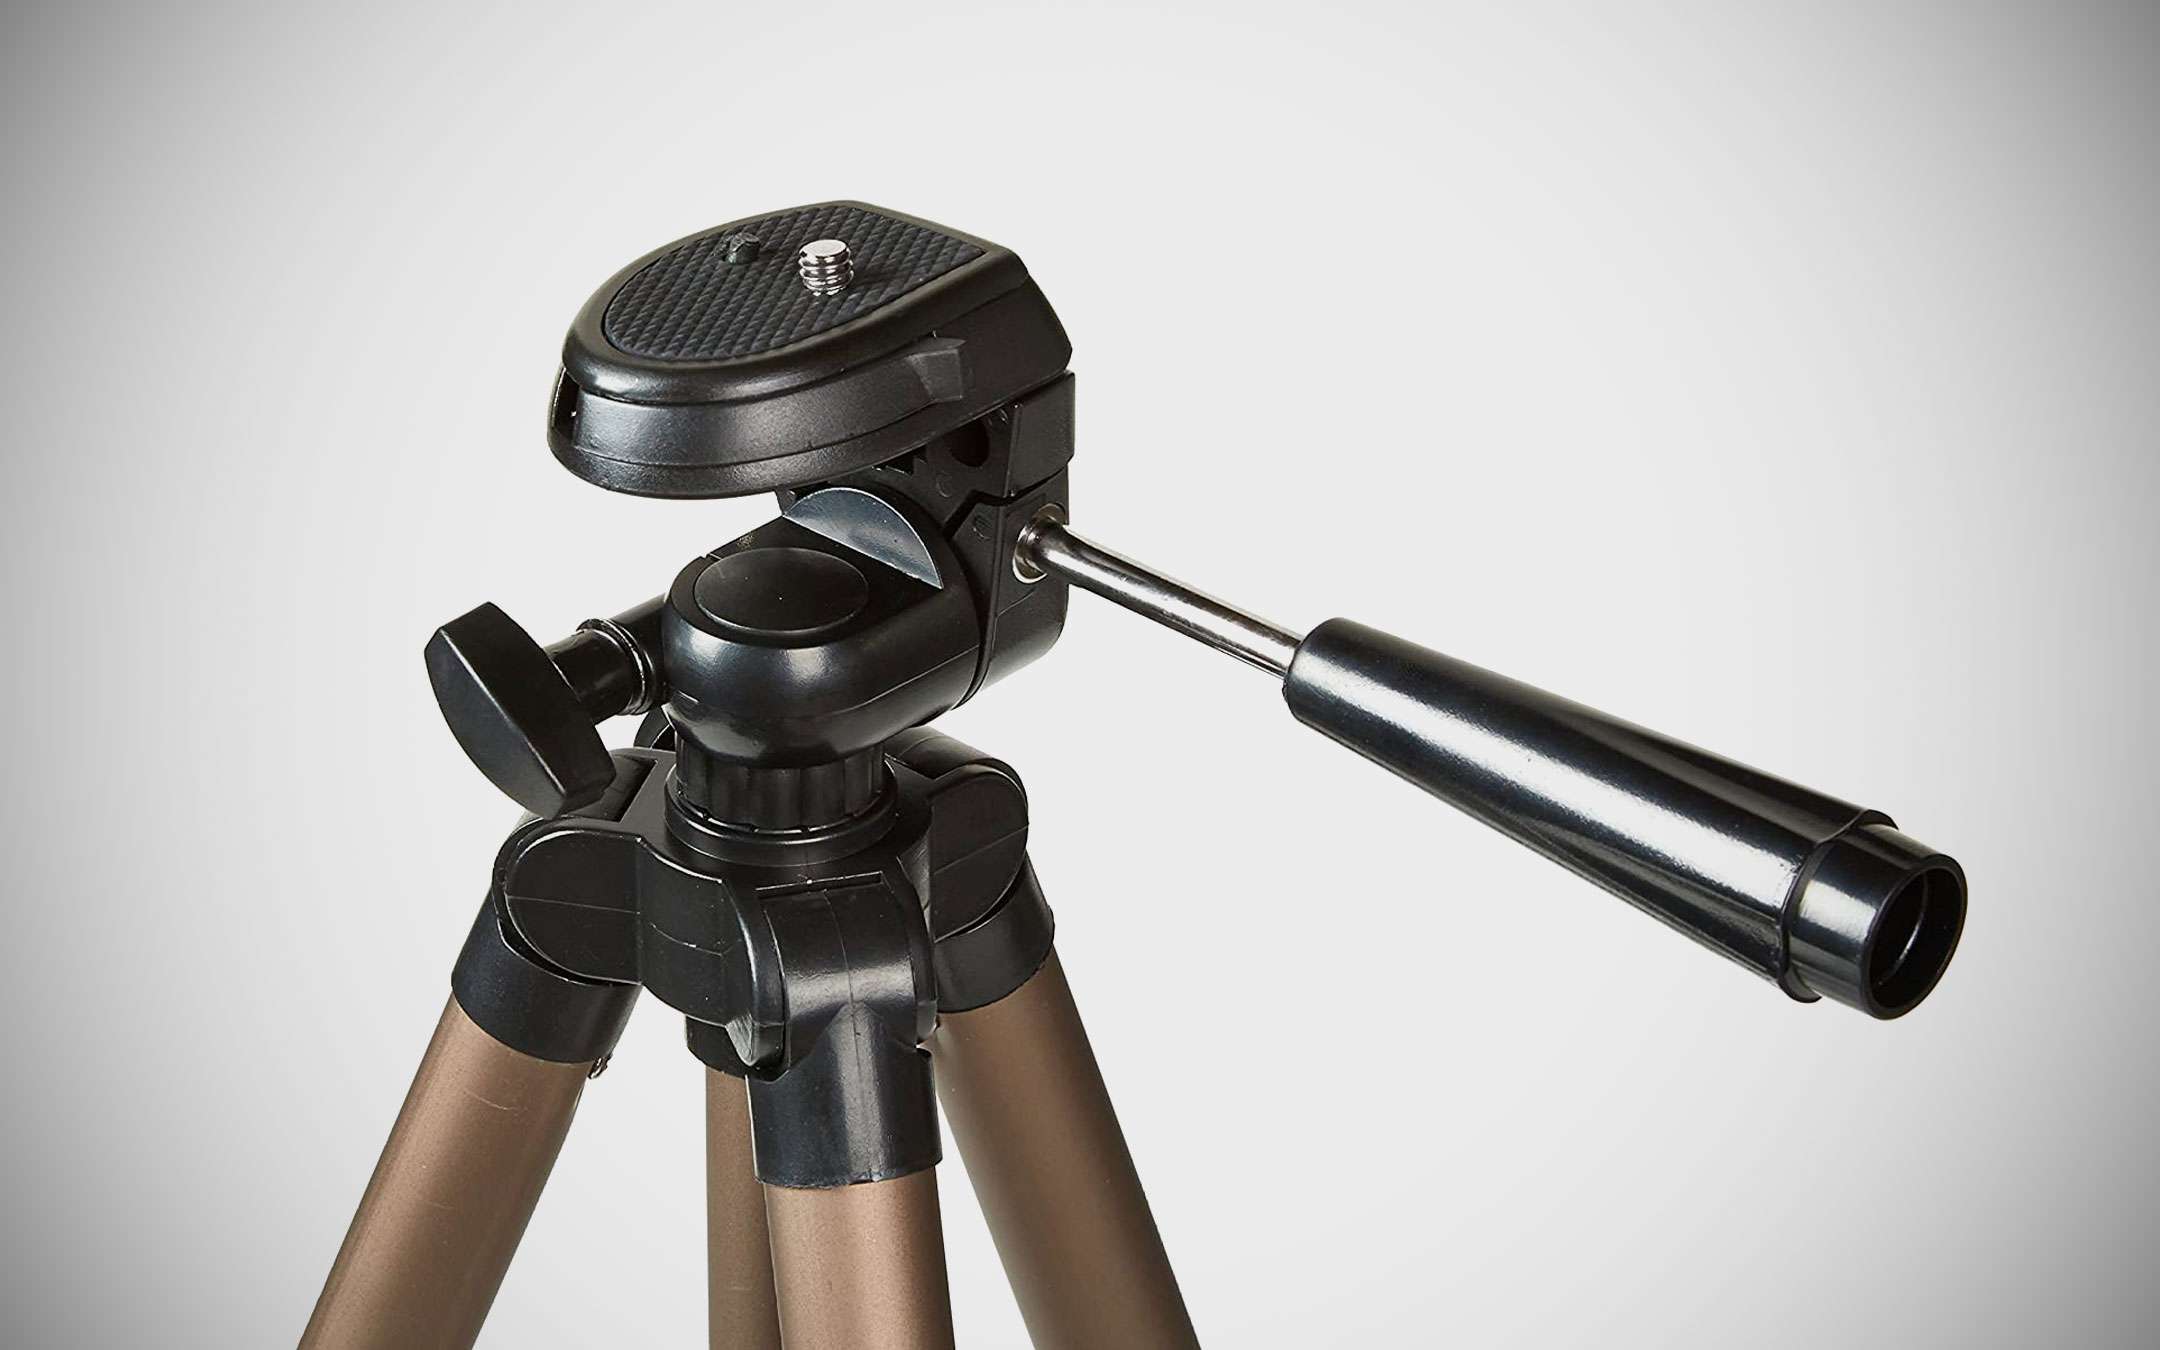 Prime Day: A tripod for only 12 euros is a bargain